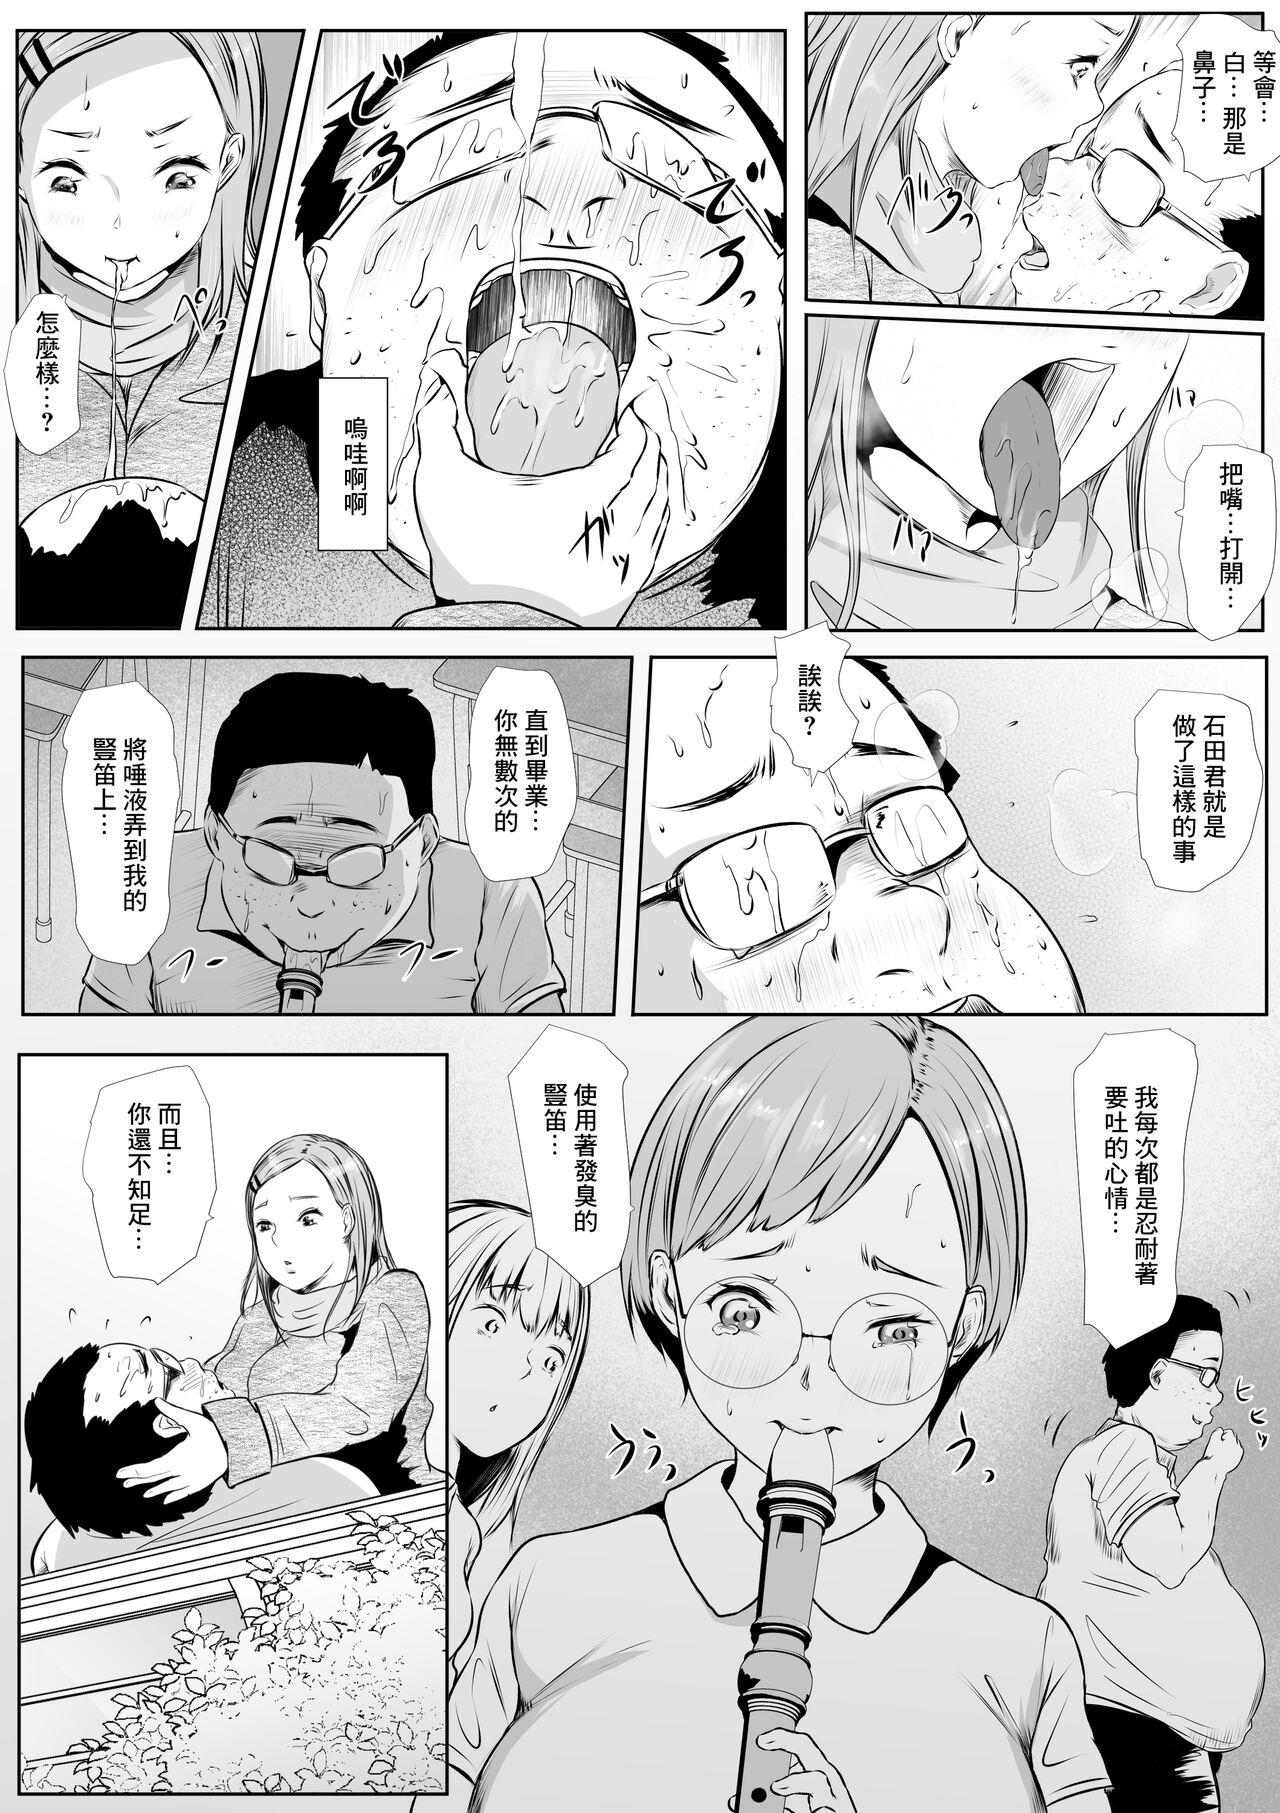 Face Hatsukoi TEN YEARS AFTER - Original Party - Page 9